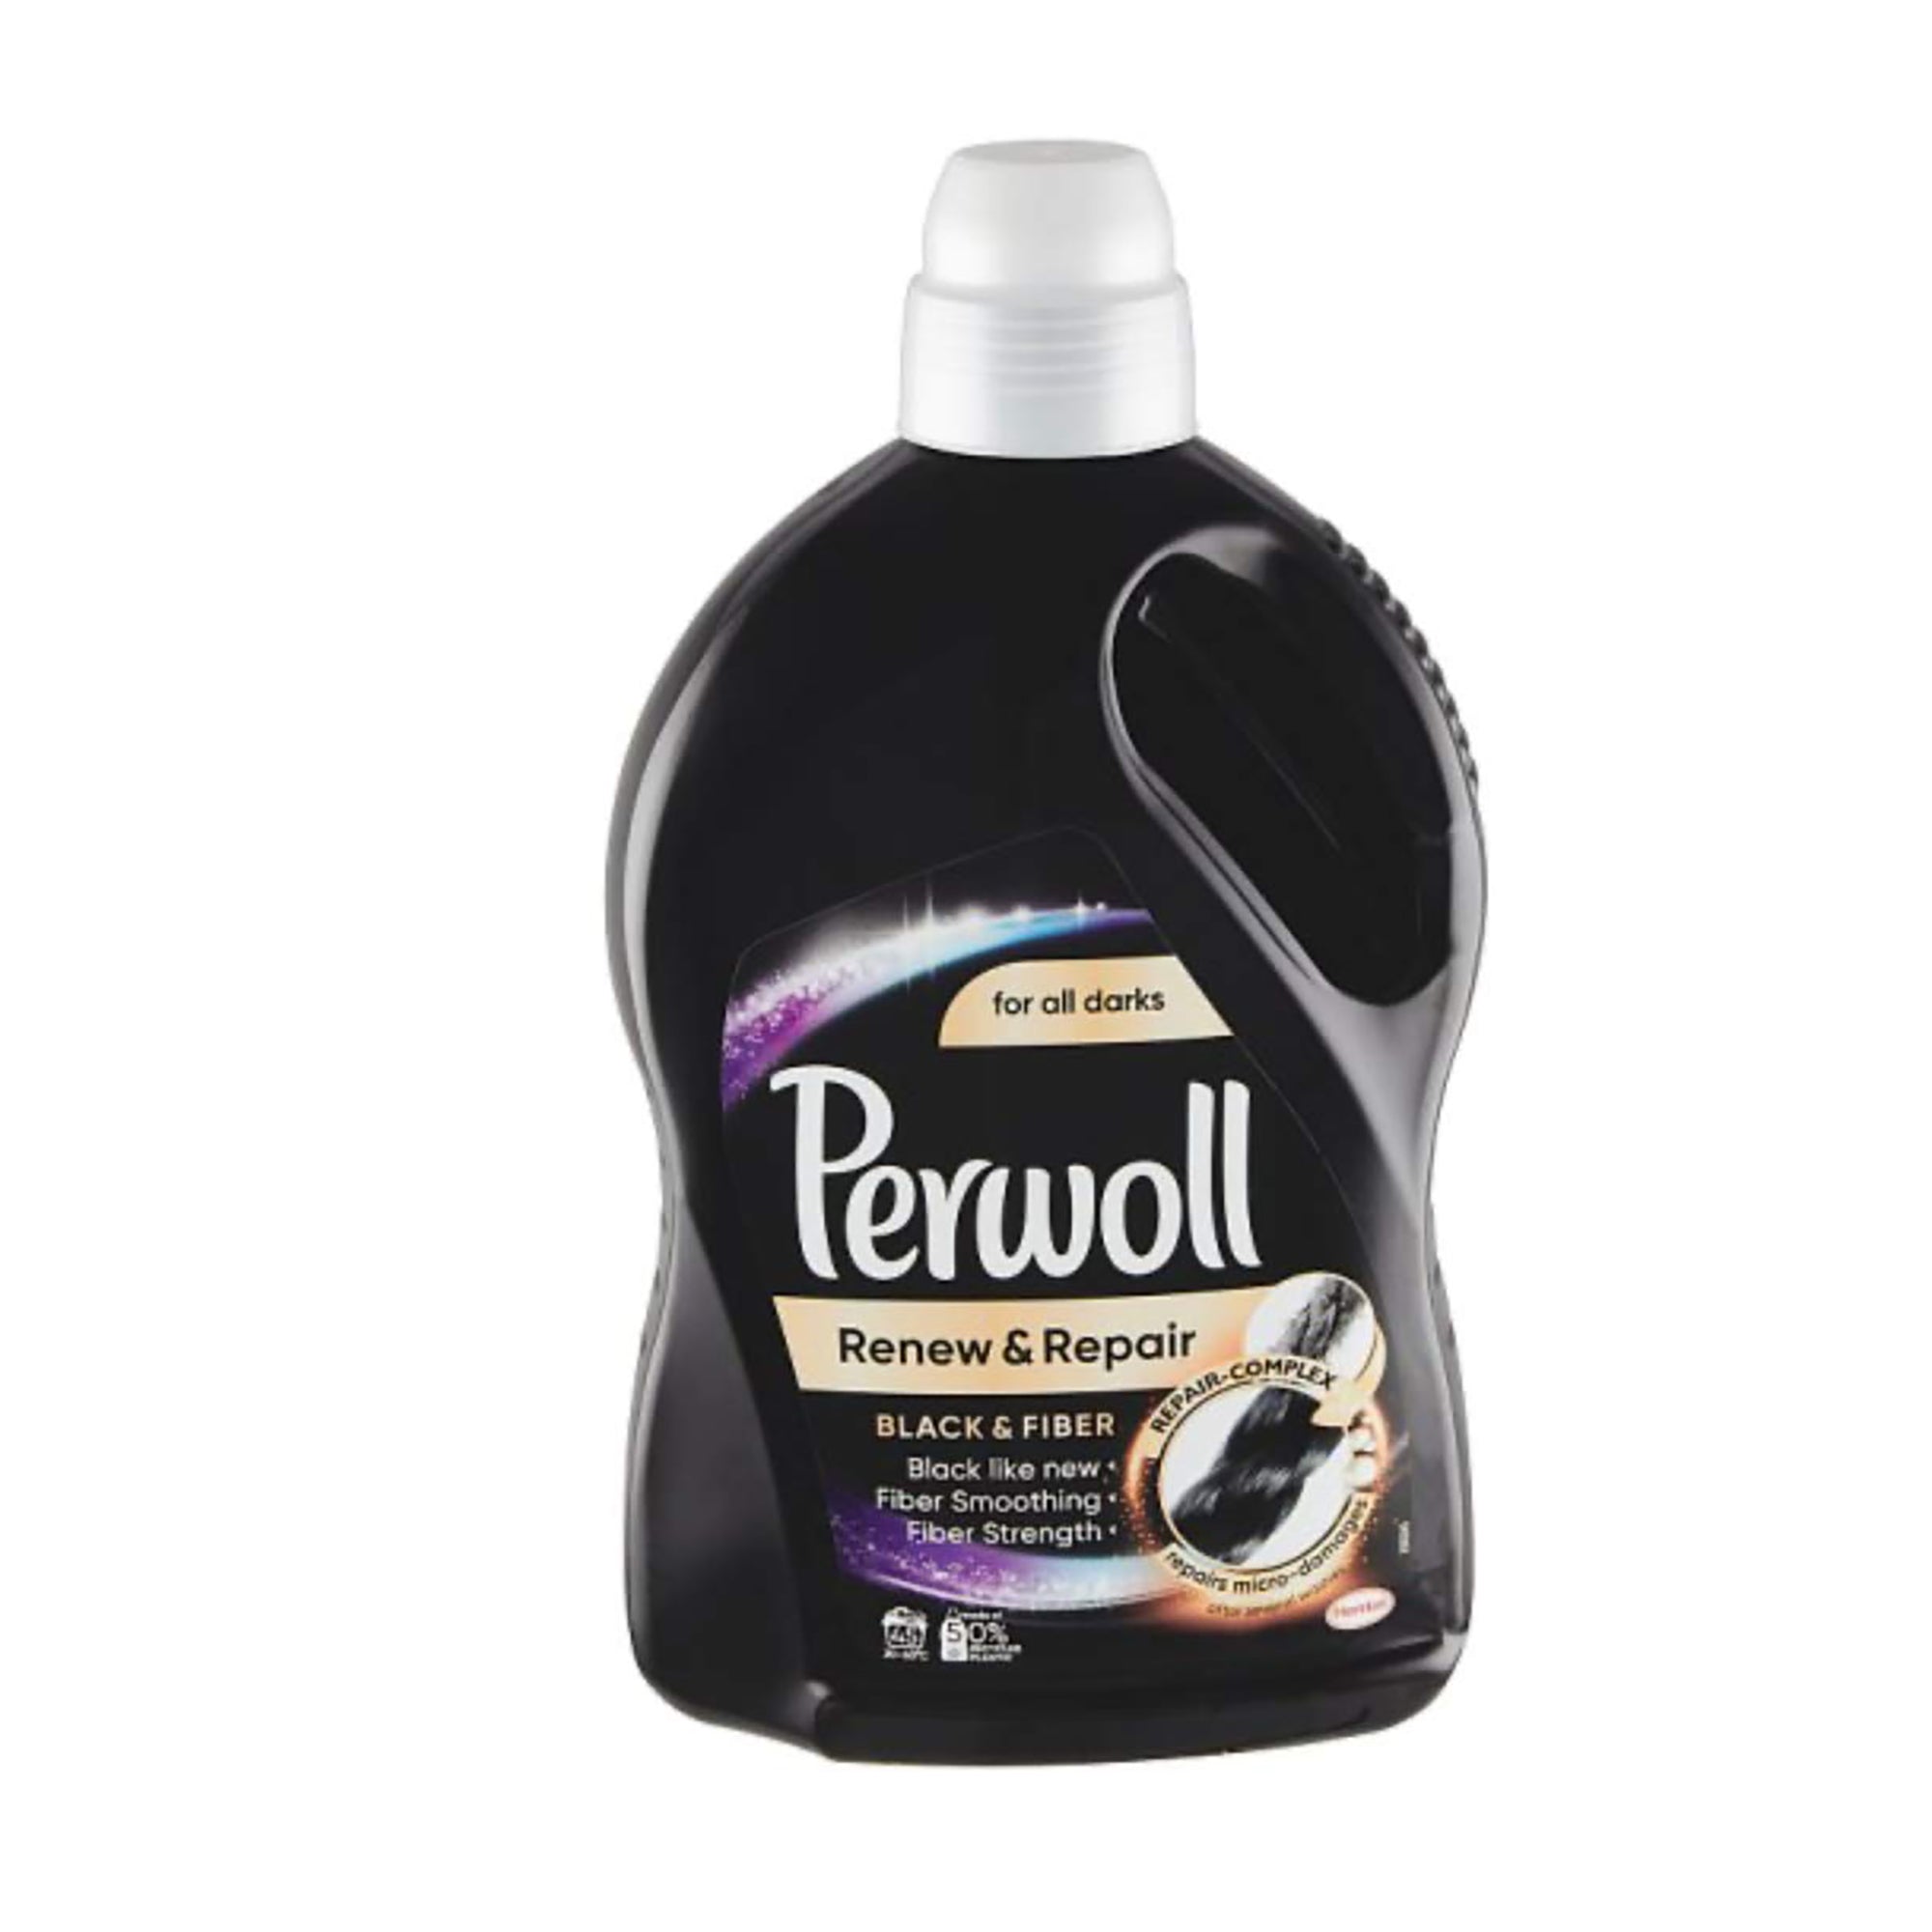 Perwoll Laundry Detergent for Black and Darks